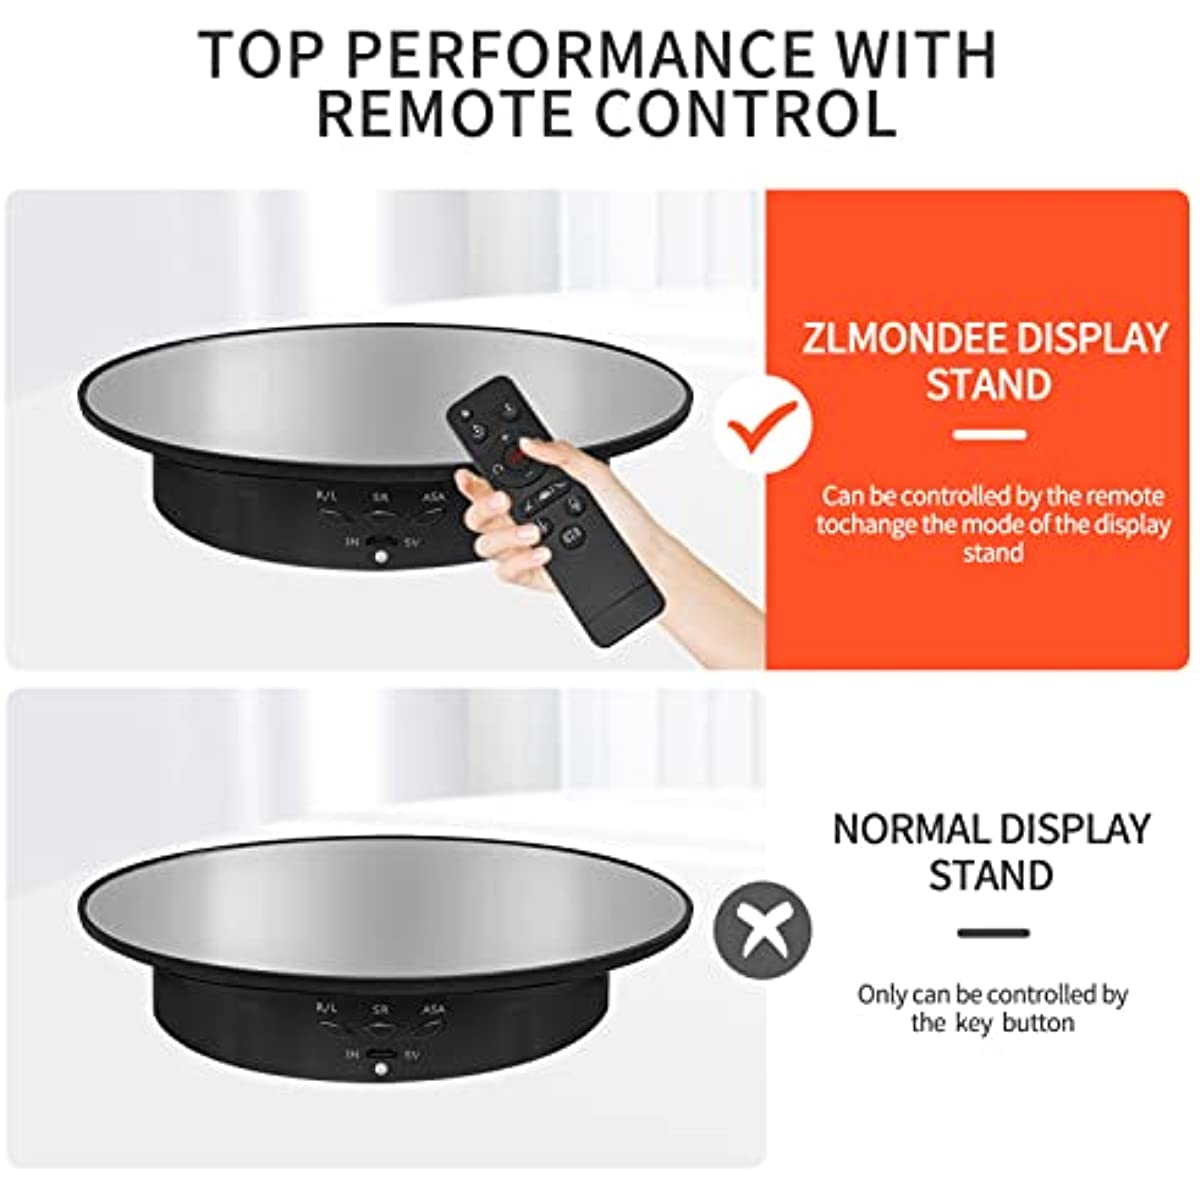 205mm Rotating Display Stand Motorized Mirror Jewelry Turntable